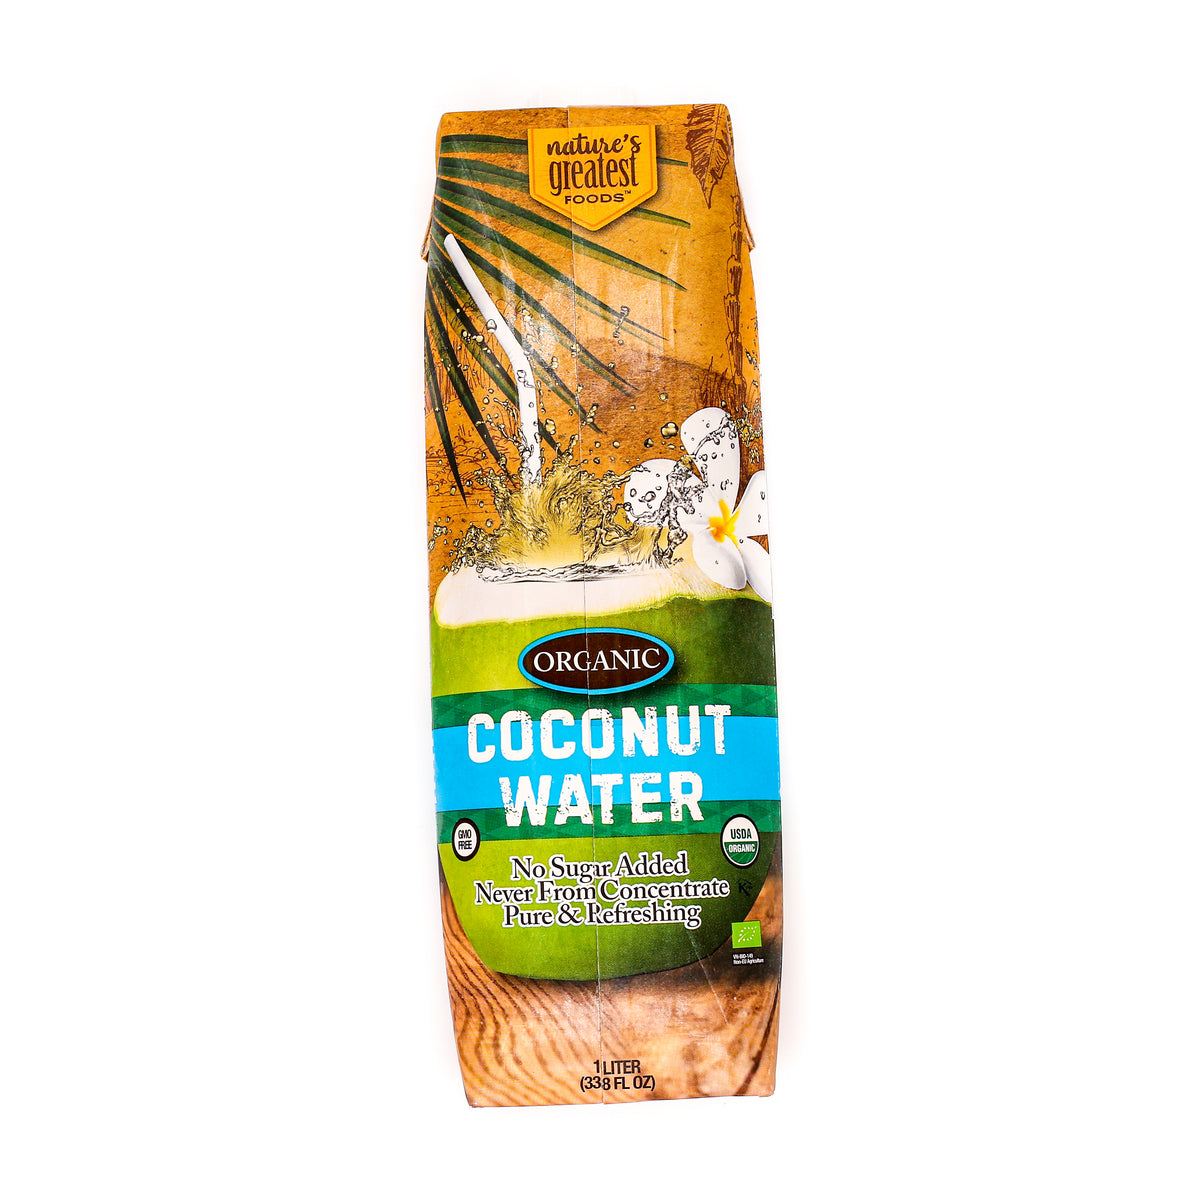 Natures Greatest Foods Coconut Water